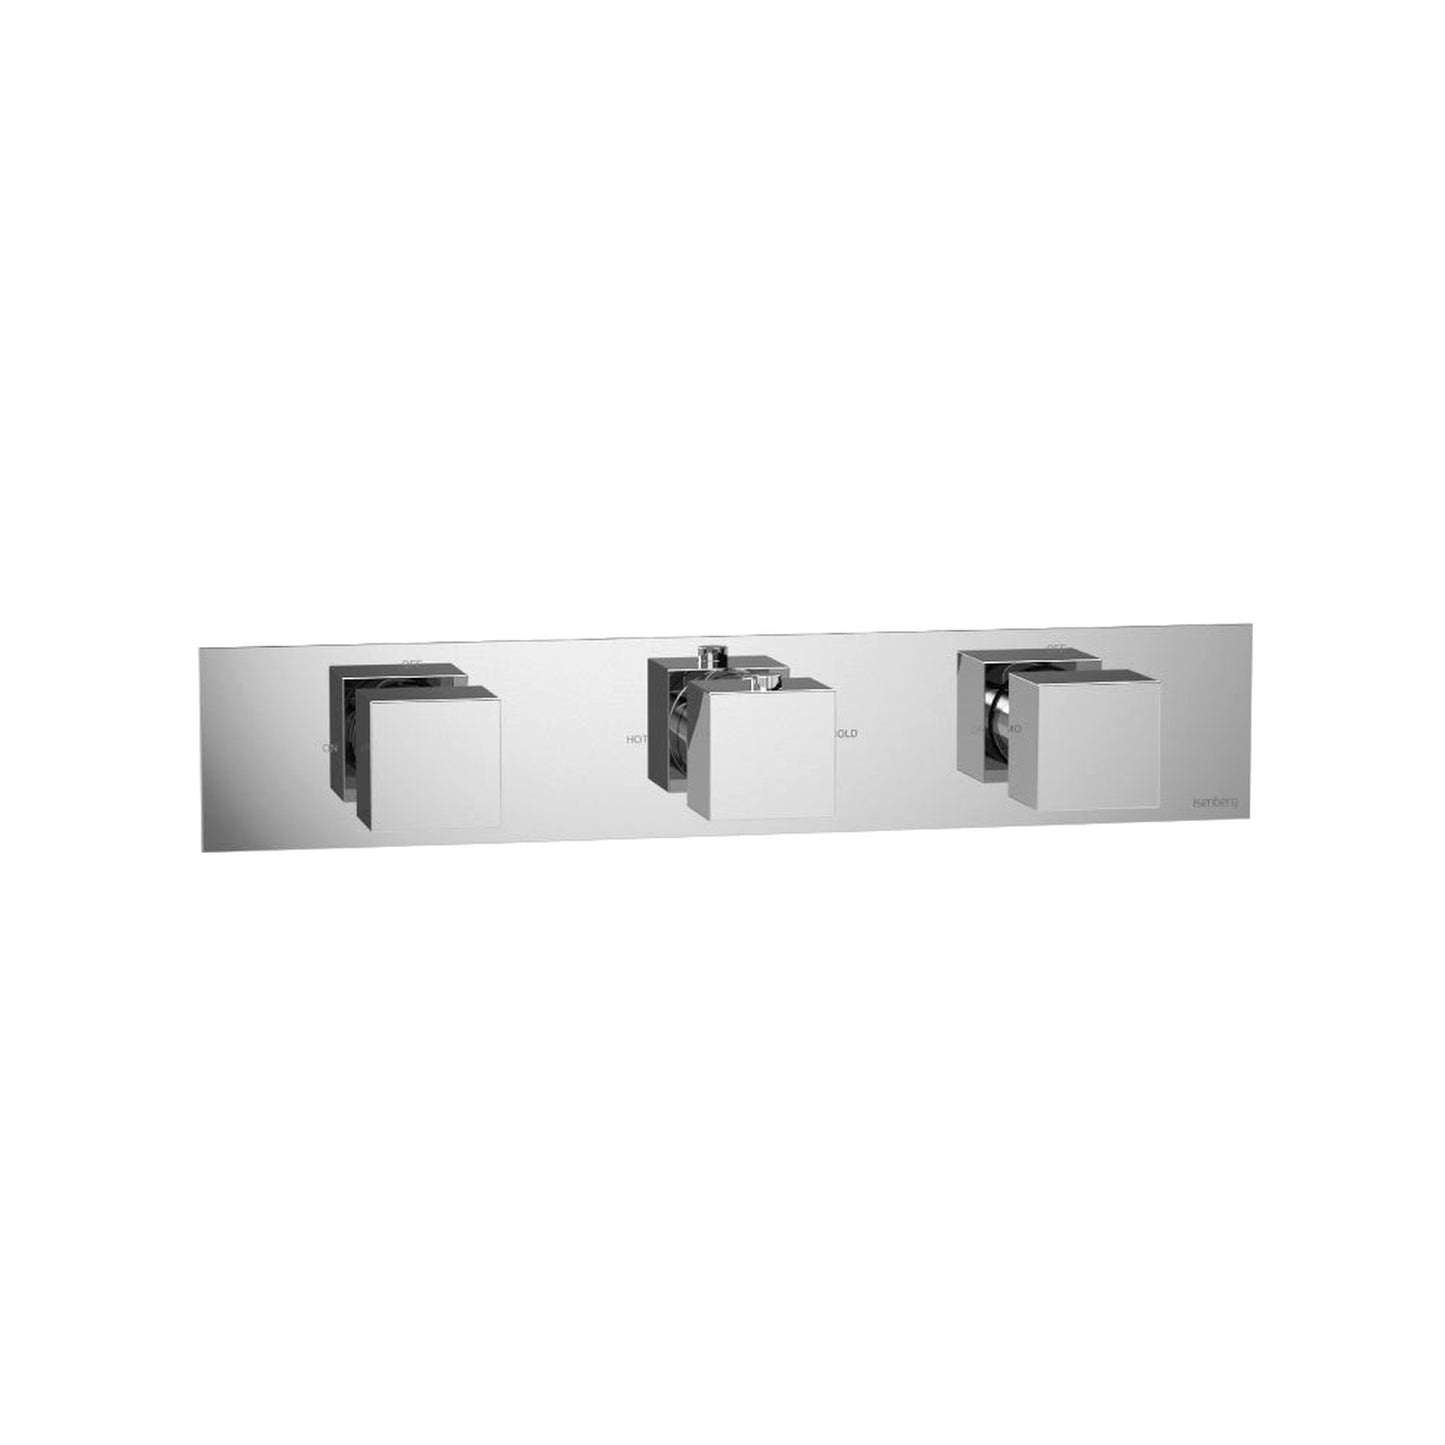 Isenberg Serie 160 Two Output Trim for Horizontal Thermostatic Valve With 2 Volume Control in Chrome